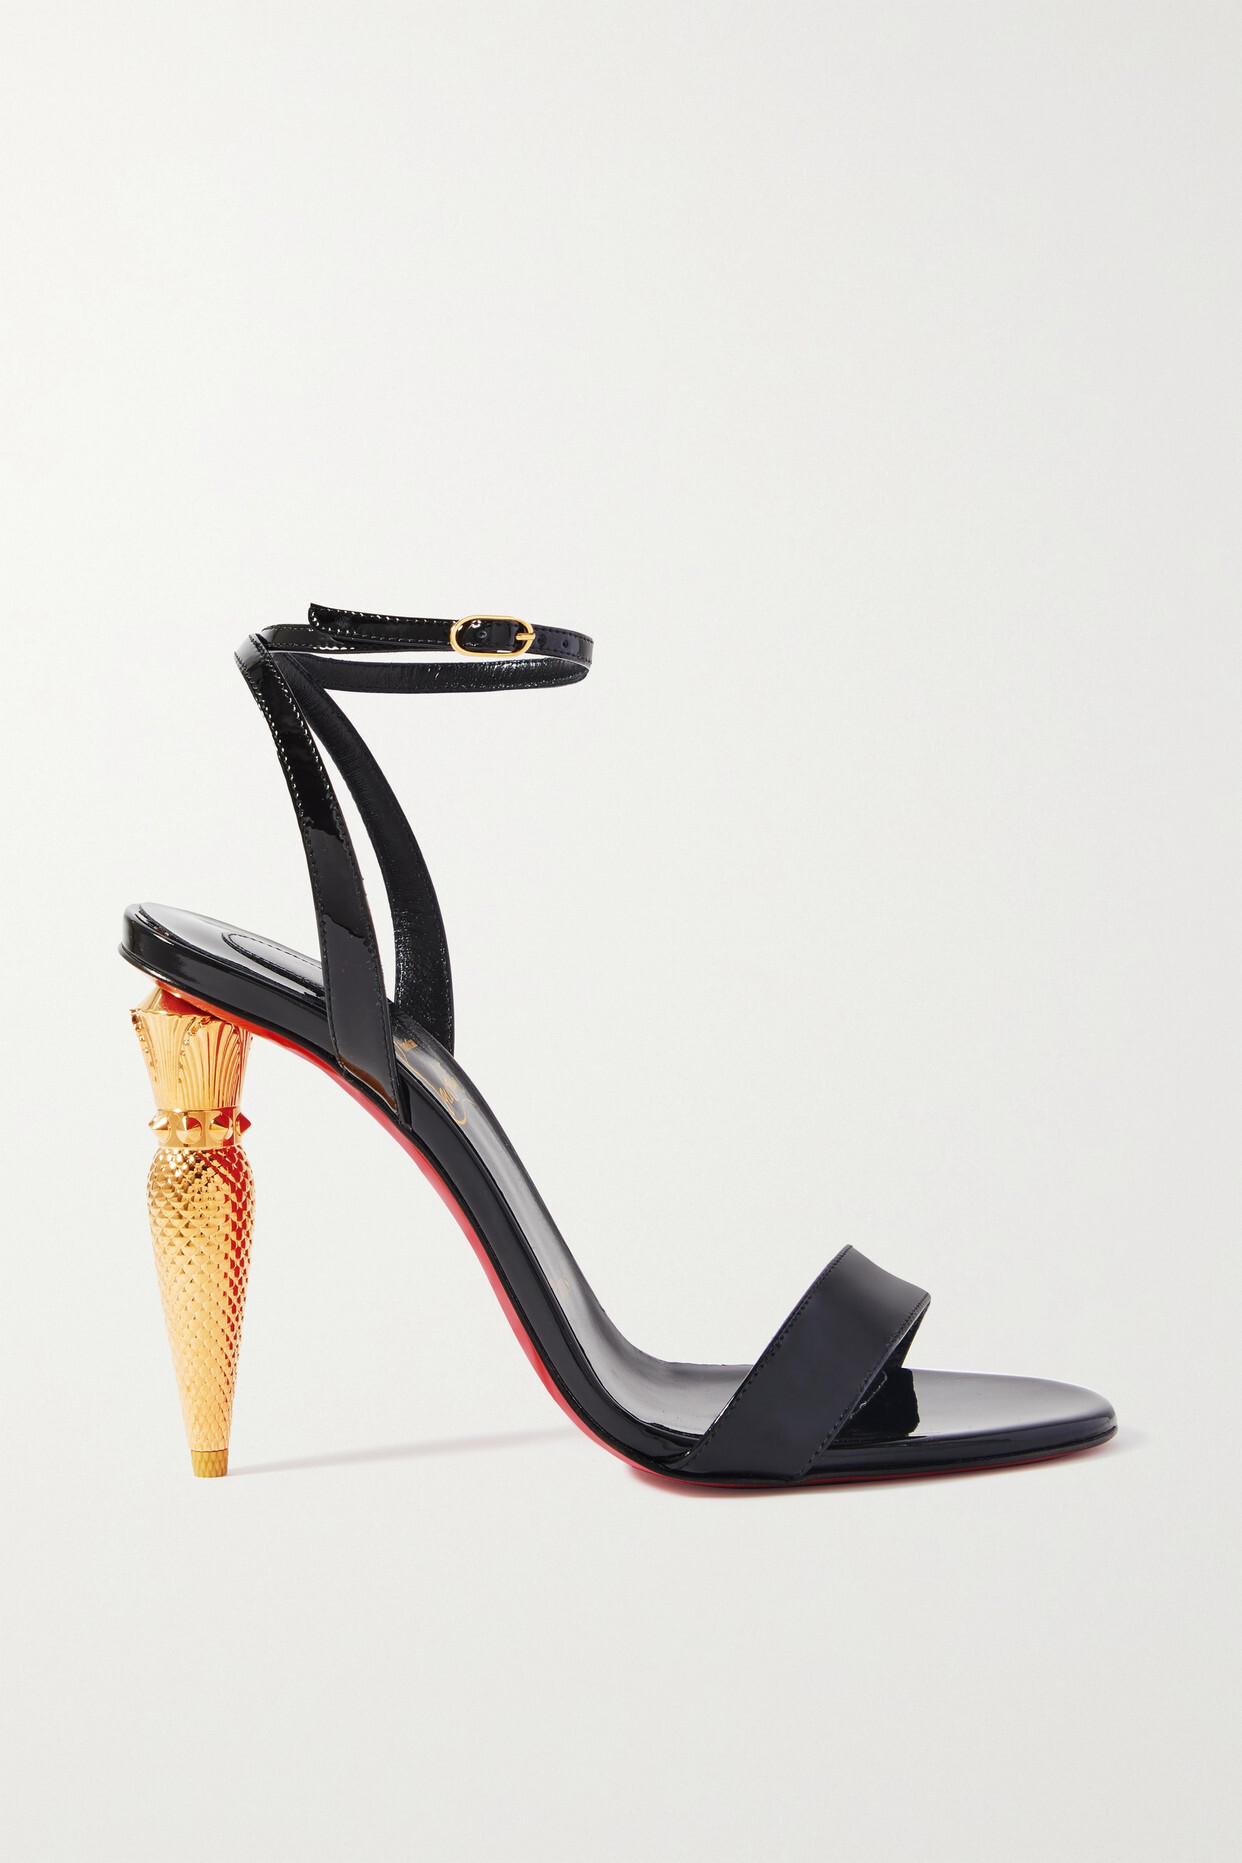 Christian Louboutin - Lipqueen 100 Patent-leather Sandals - Black